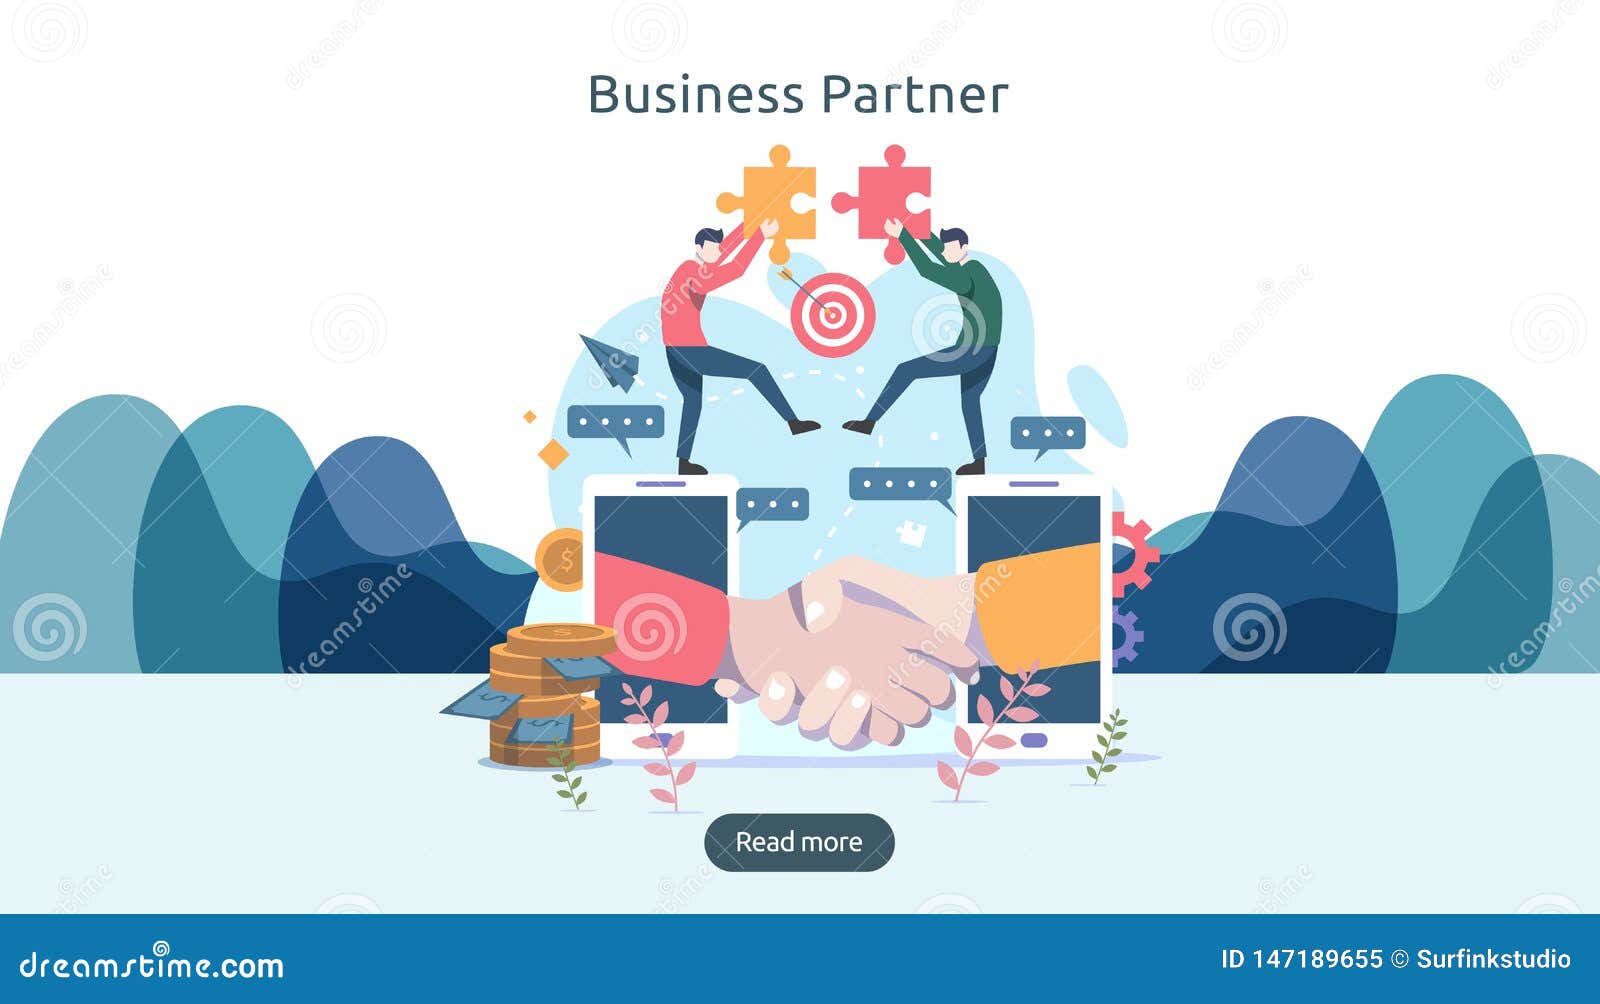 business partnership relation concept idea with tiny people character. team working partner together template for web landing page